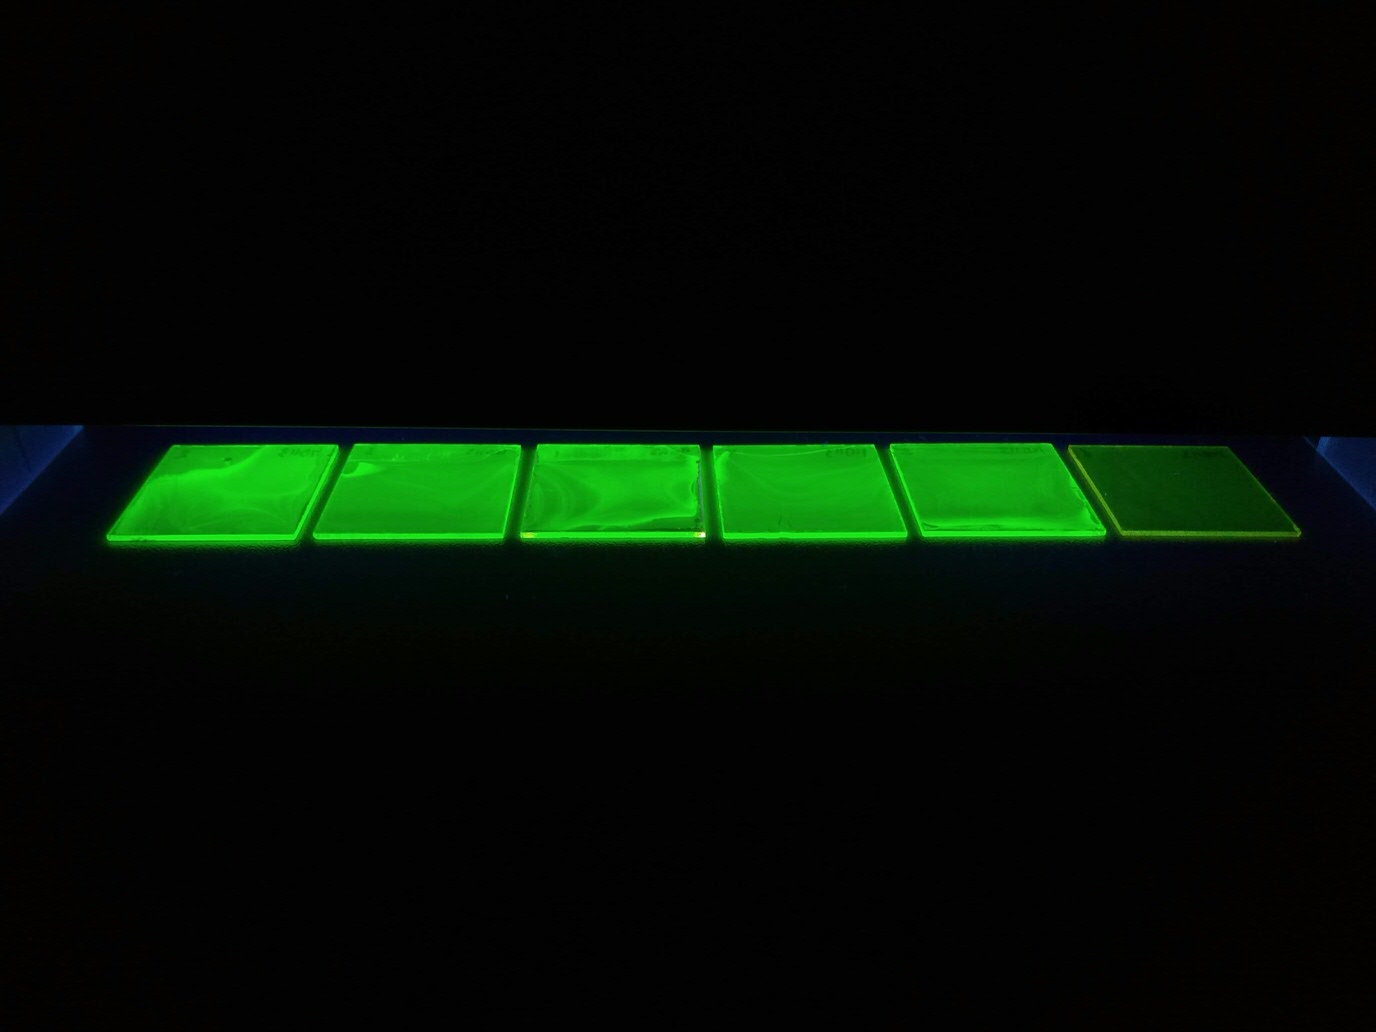 A typical sampls that I work with under UV light; showing some nice bright green photoluminescence